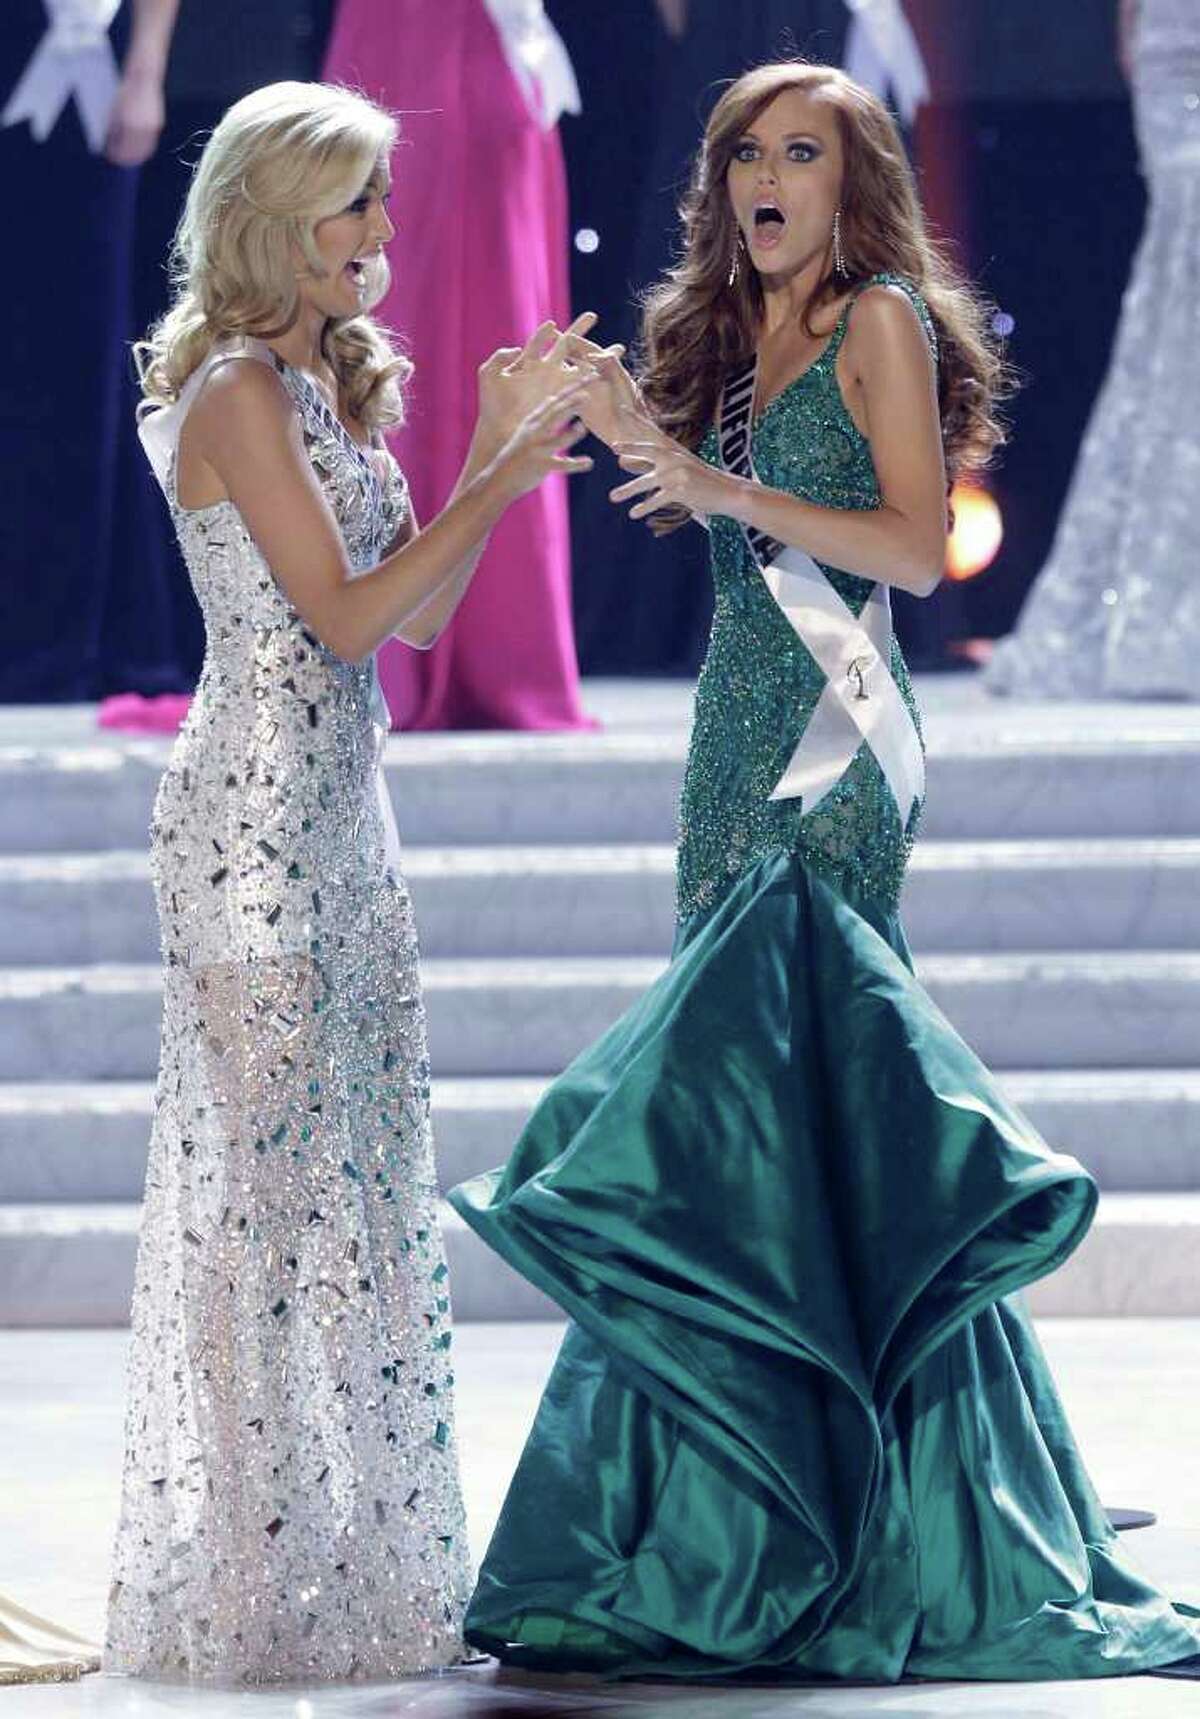 Alyssa Campanella, Miss California, reacts as she is announced as the 2011 Miss USA as Miss Tennessee, Ashley Elizabeth Durham looks on, Sunday, June 19, 2011, in Las Vegas.